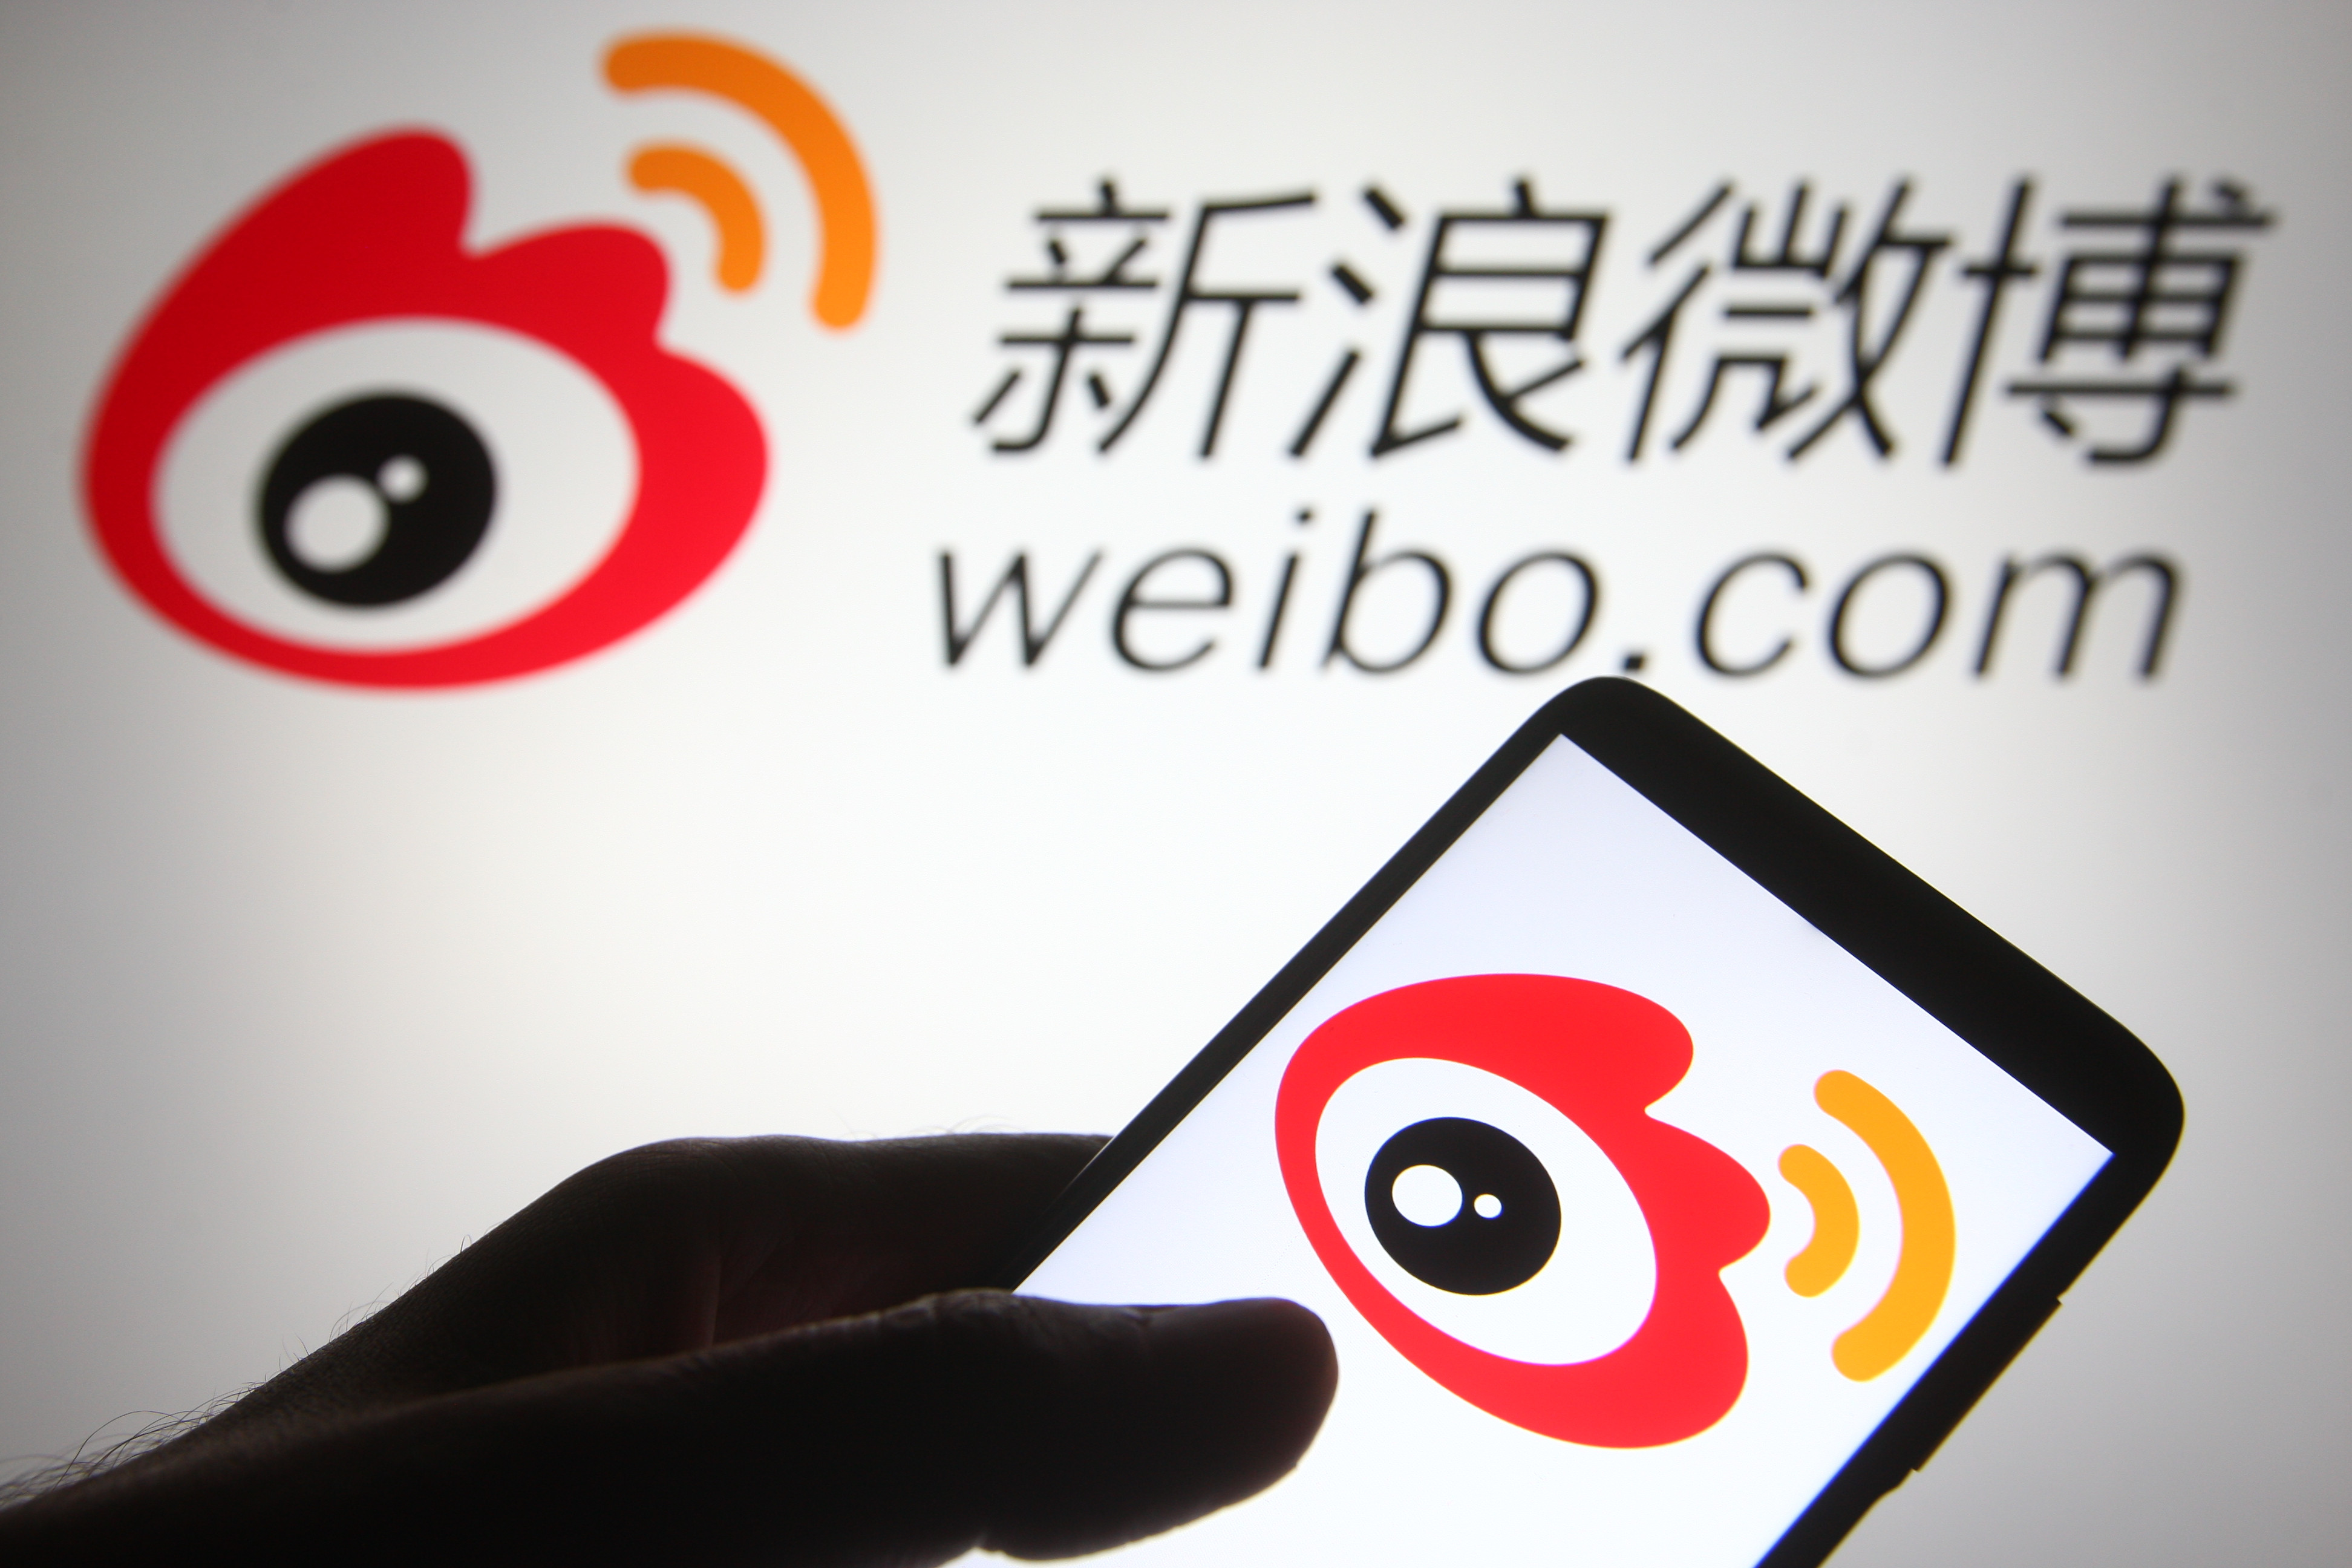 Weibo is one of the country’s biggest platforms for public debate. Photo: Shutterstock